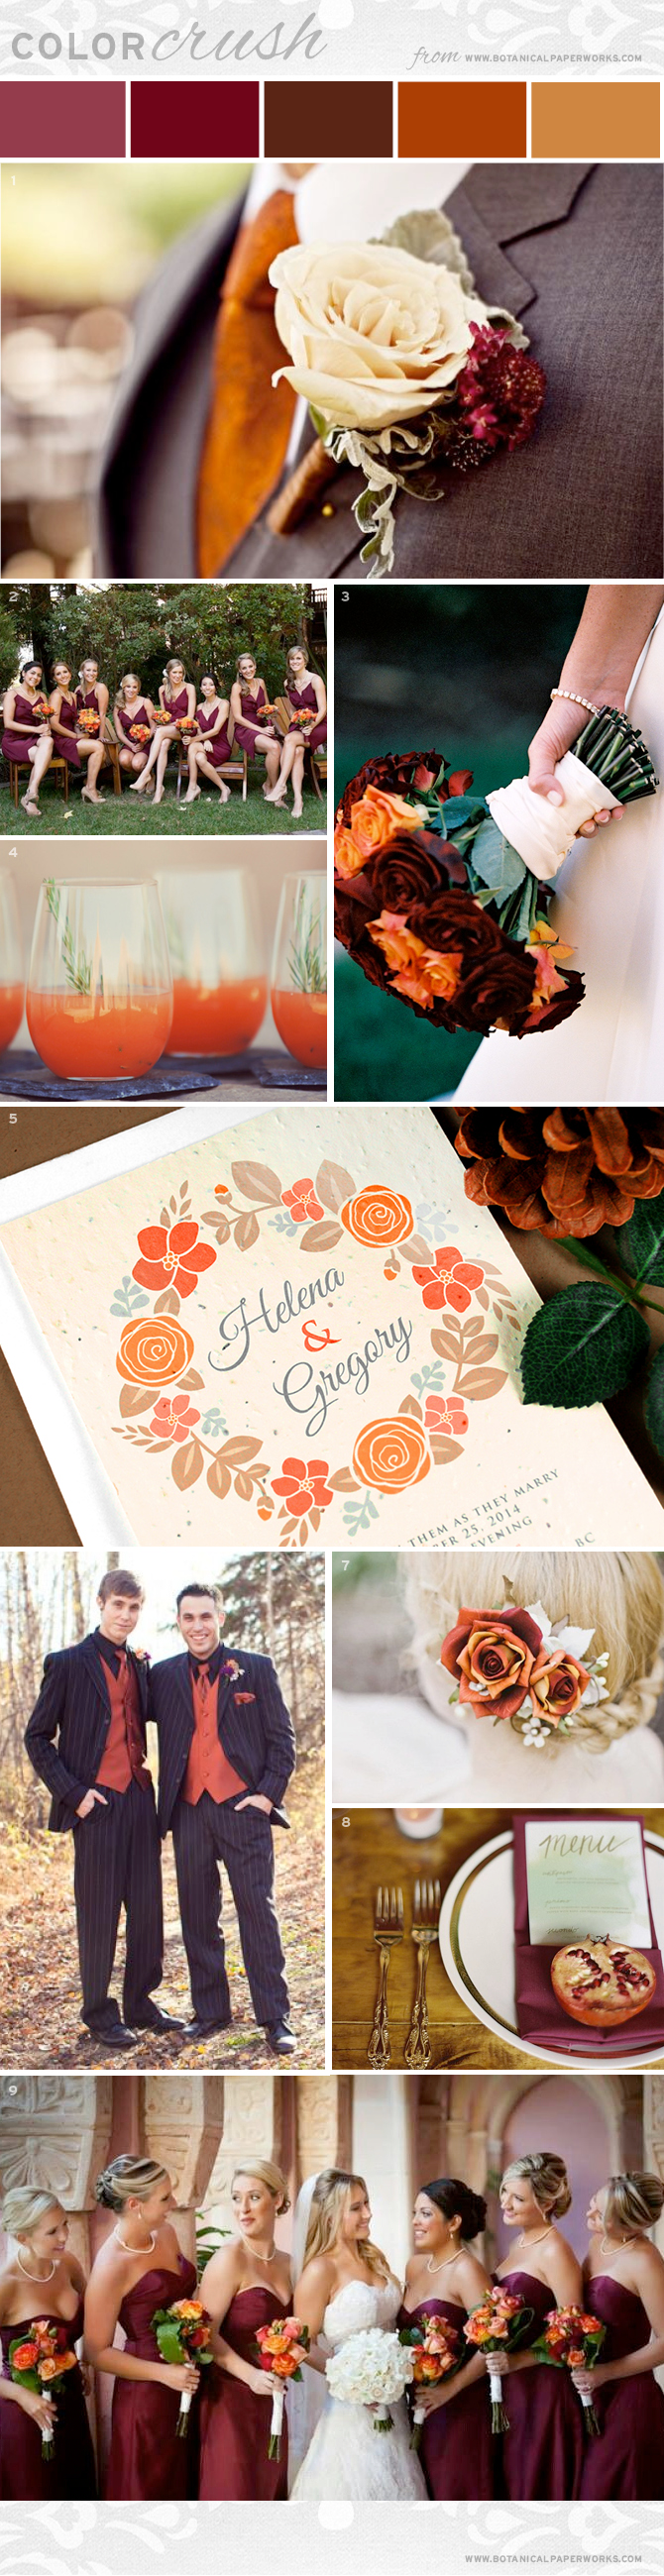 Check out this stunning wedding palette potential - Burnt Orange & Burgundy! The fall inspired hues are full of character and create a warm and inviting mood for guests. 